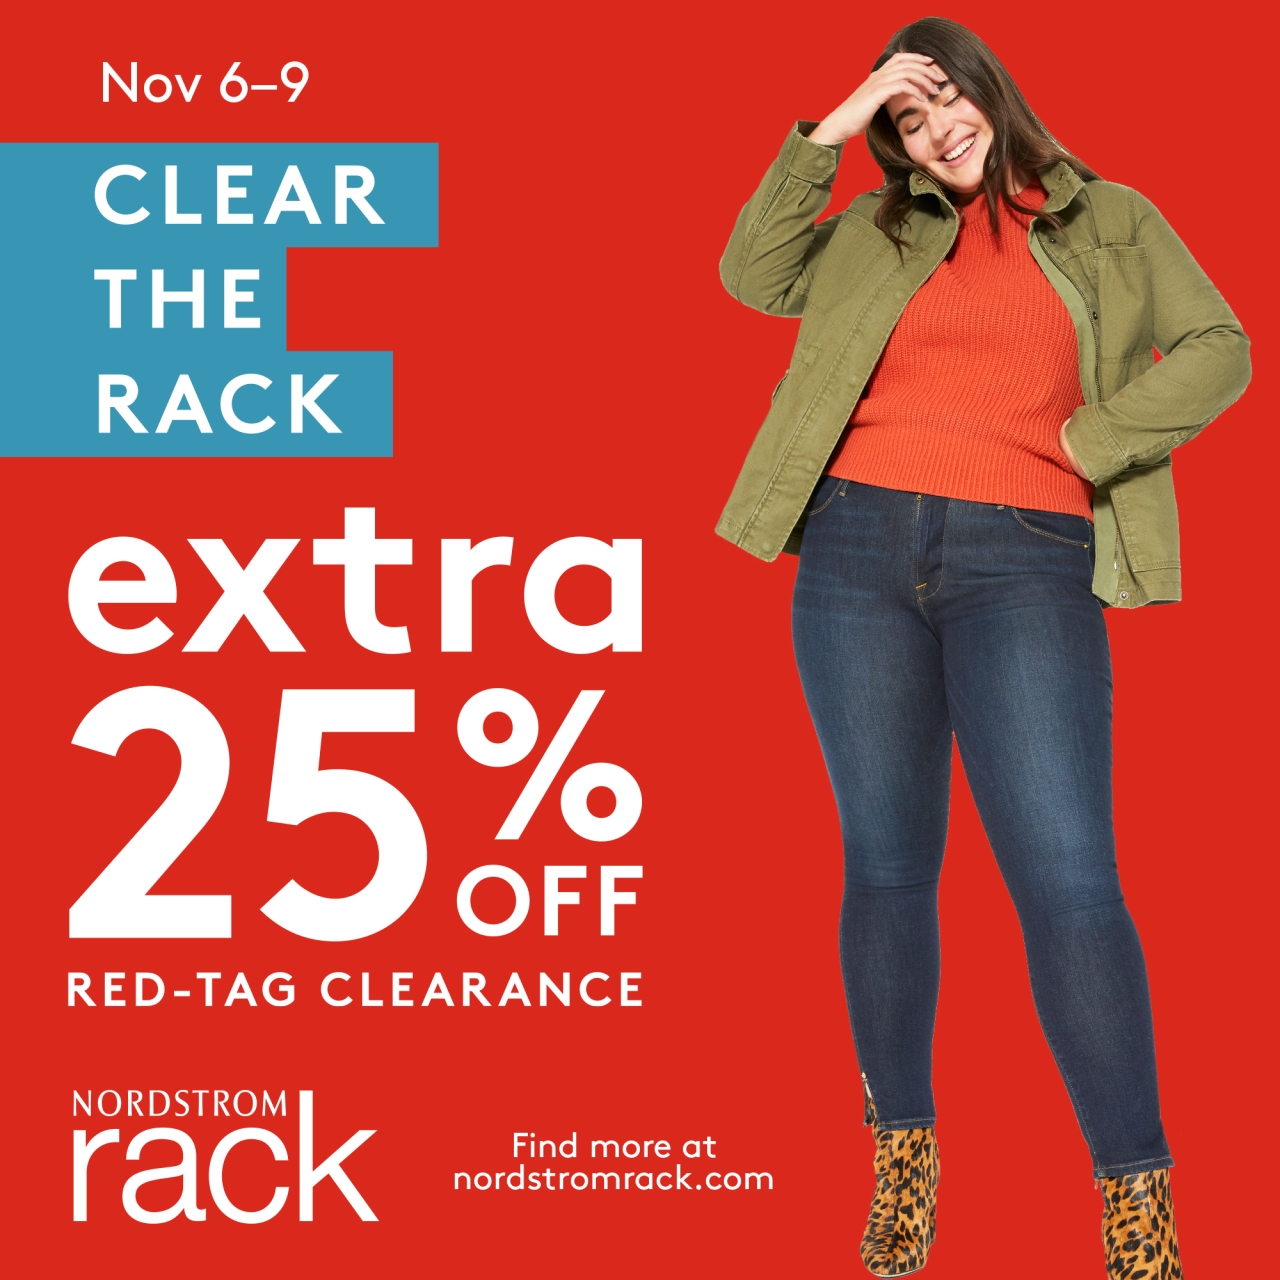 It's CLEAR THE RACK time NOW through Monday! Destiny USA